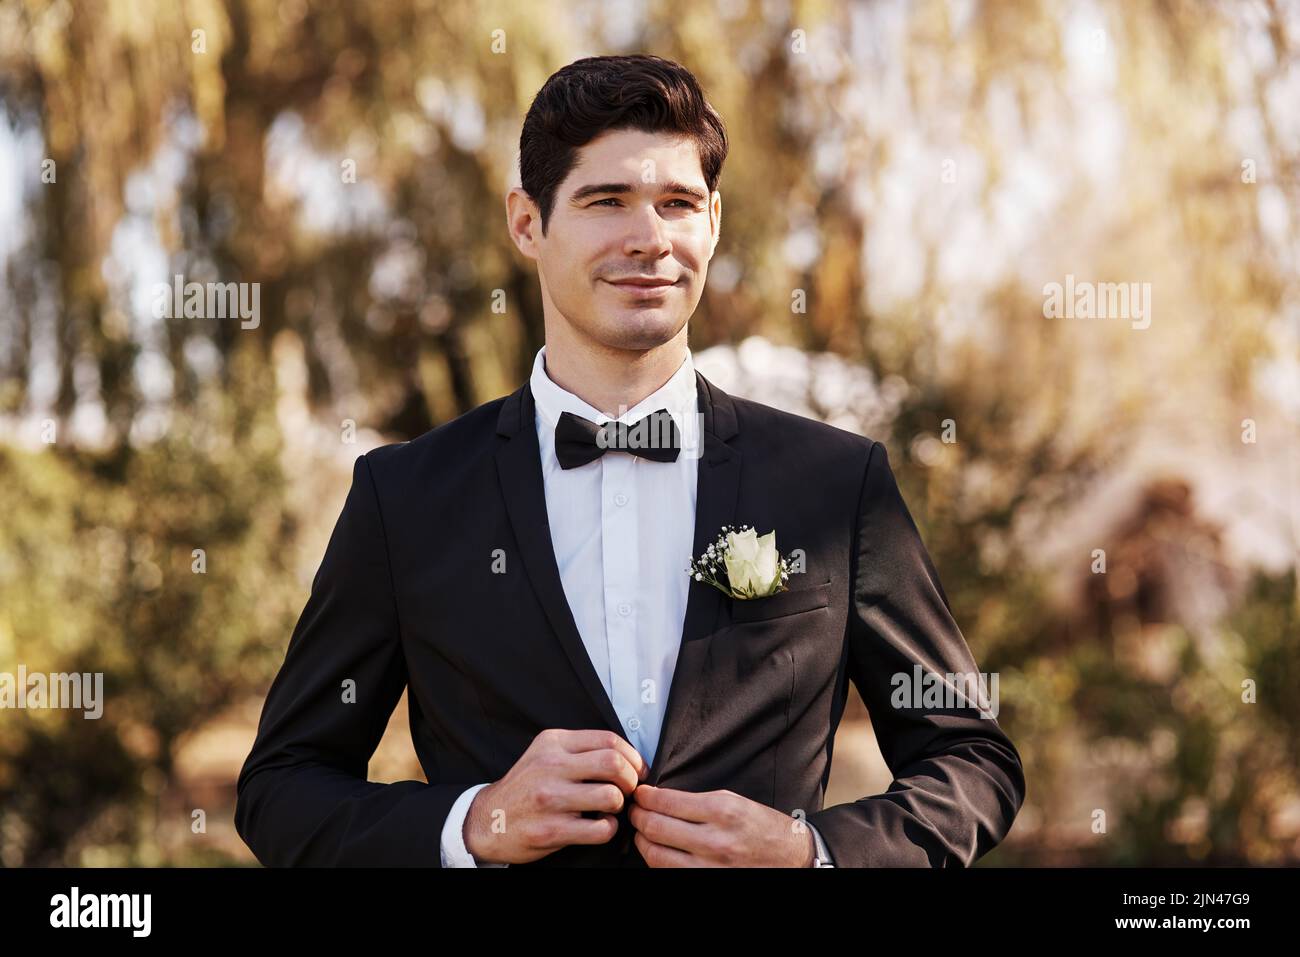 Preparing to say his I dos. a handsome young bridegroom adjusting his suit while preparing for his wedding outdoors. Stock Photo